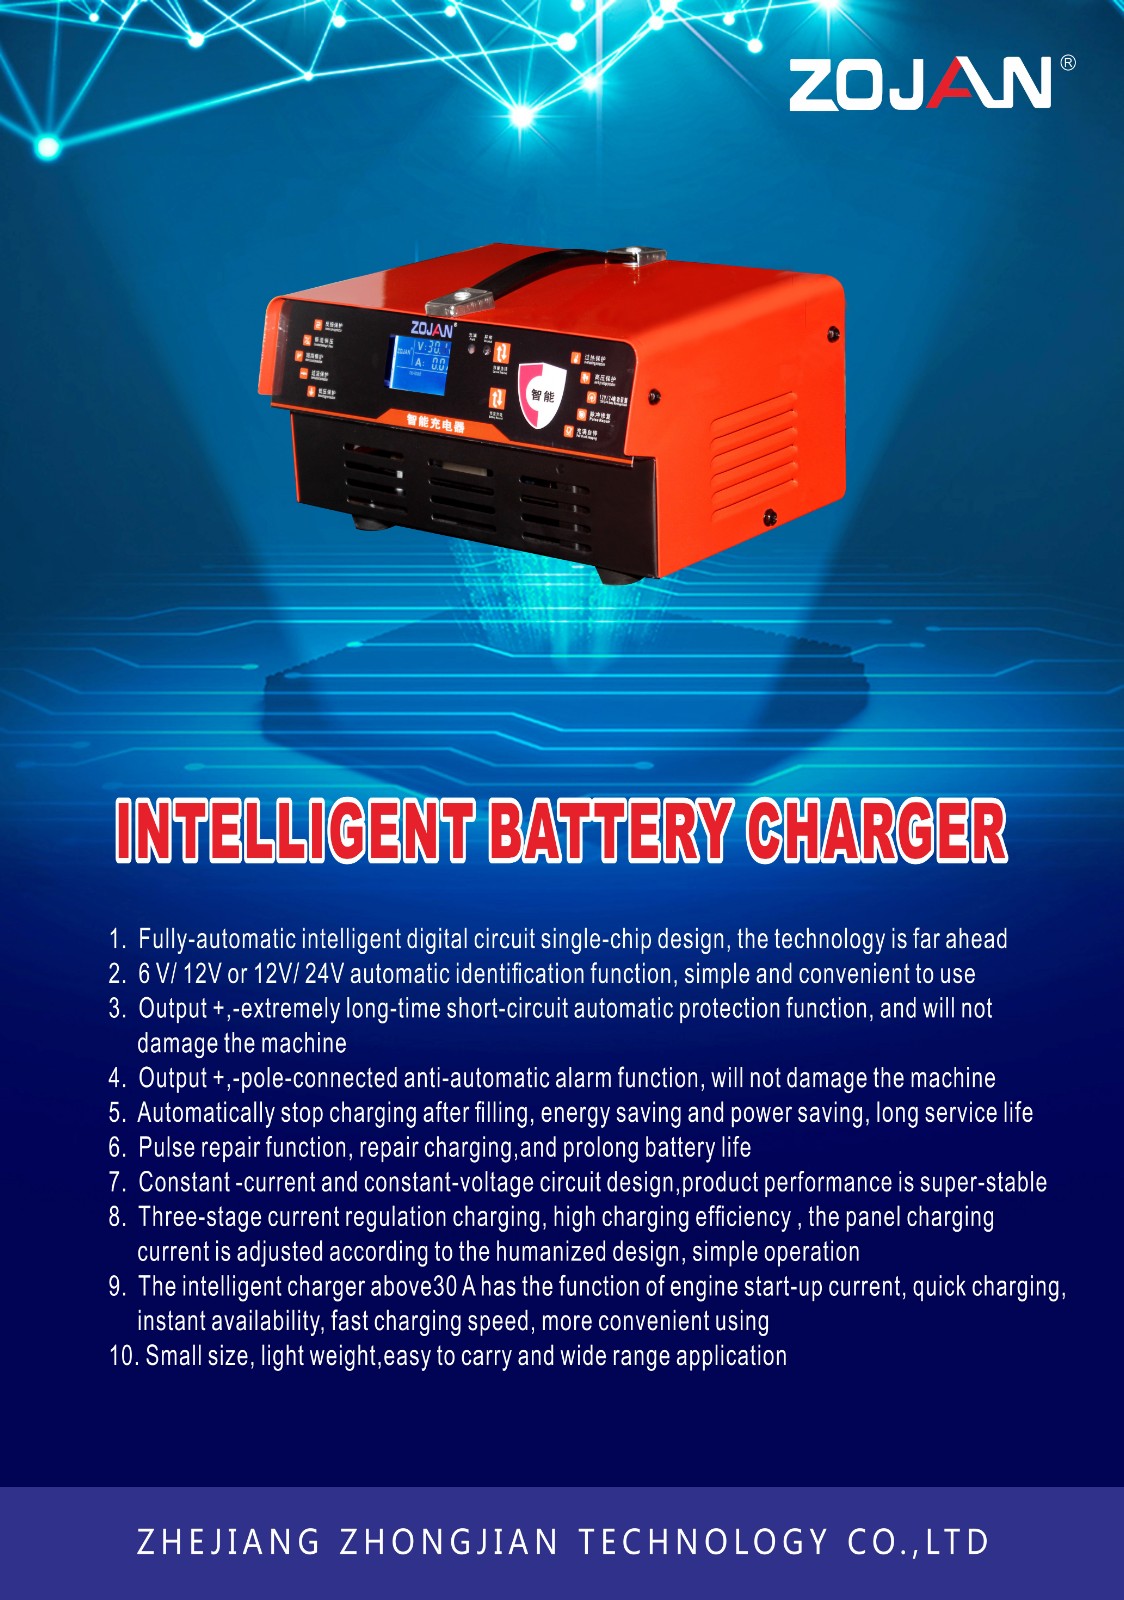 INTELLIGENT BATTERY CHARGER